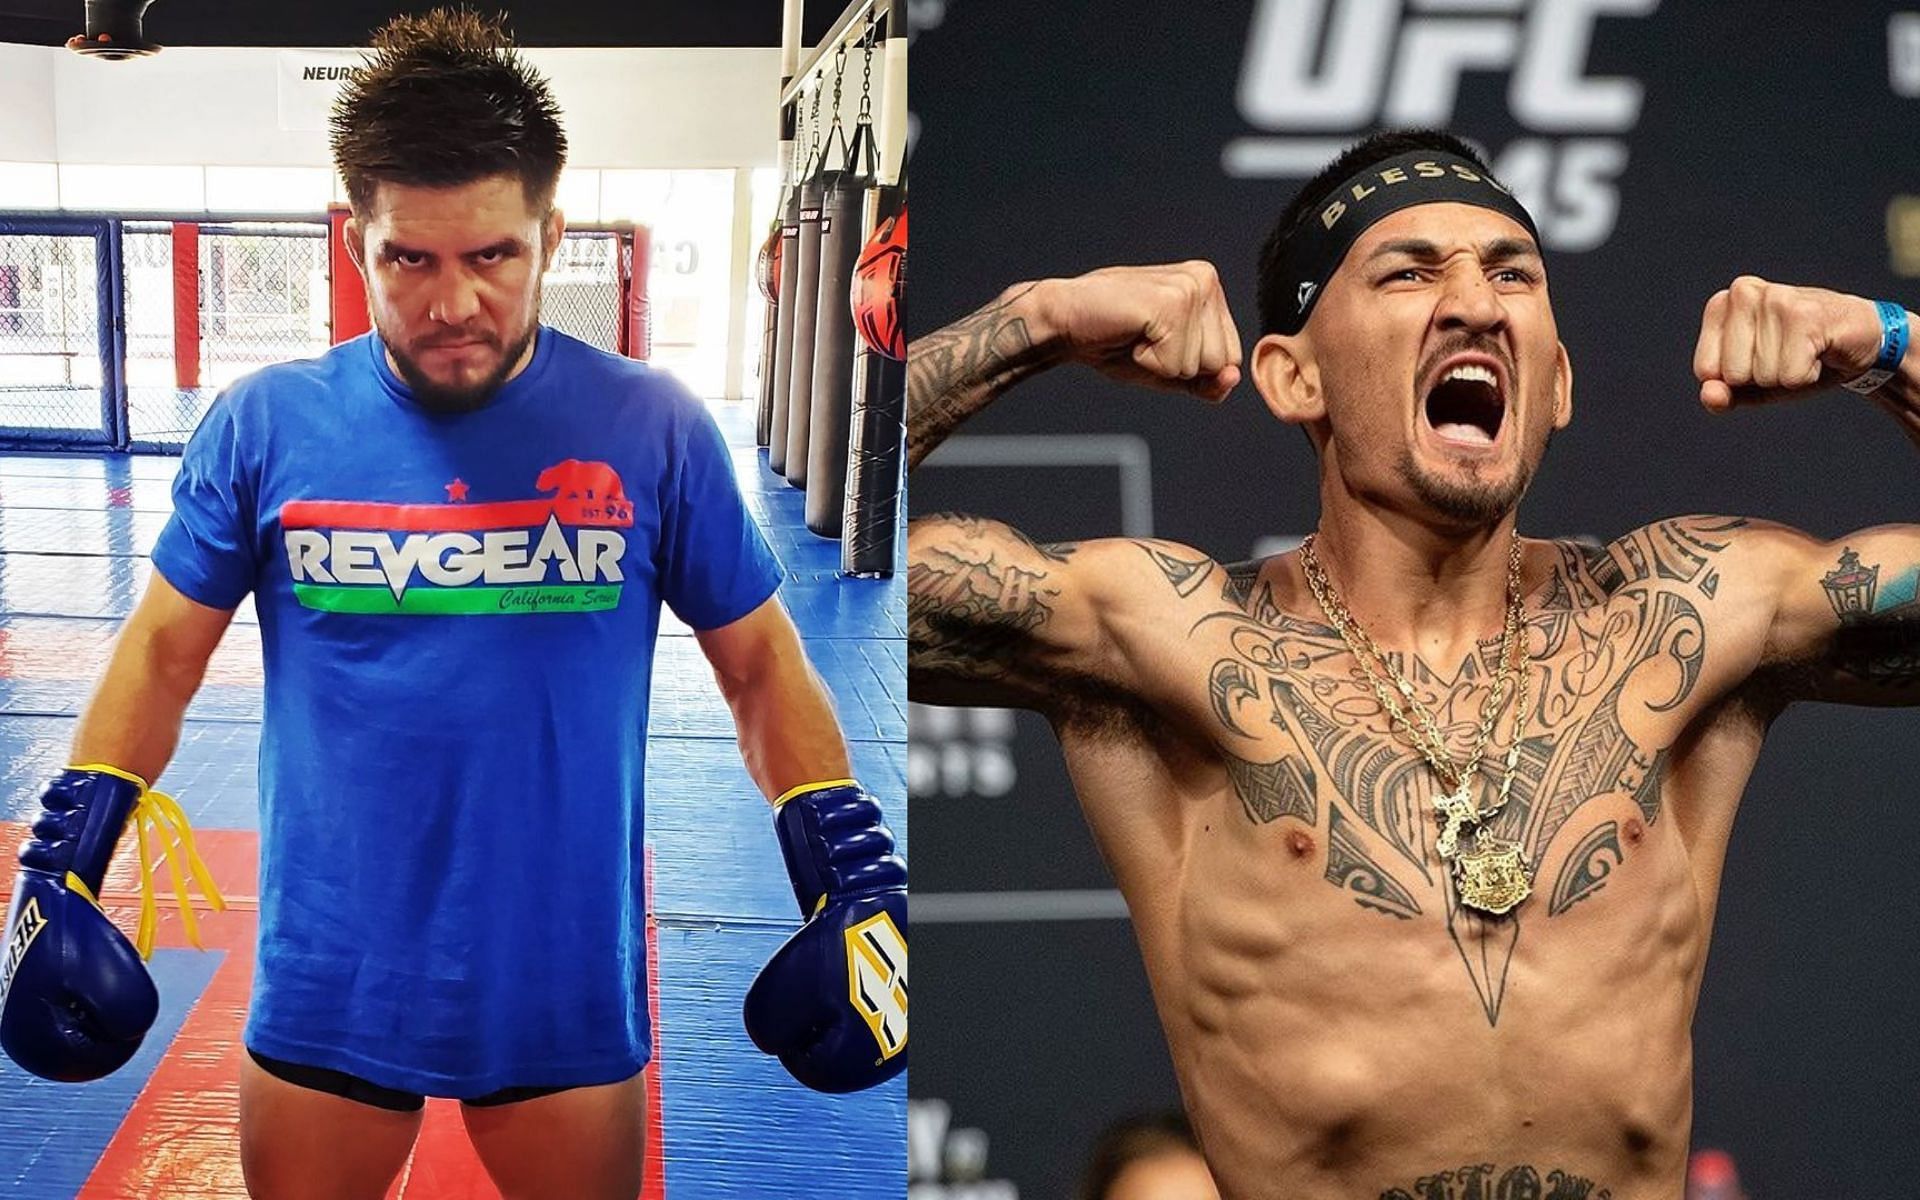 Henry Cejudo (Left) and Max Holloway (Right) [Images via: @henry_cejuod and @blessedmma on Instagram]